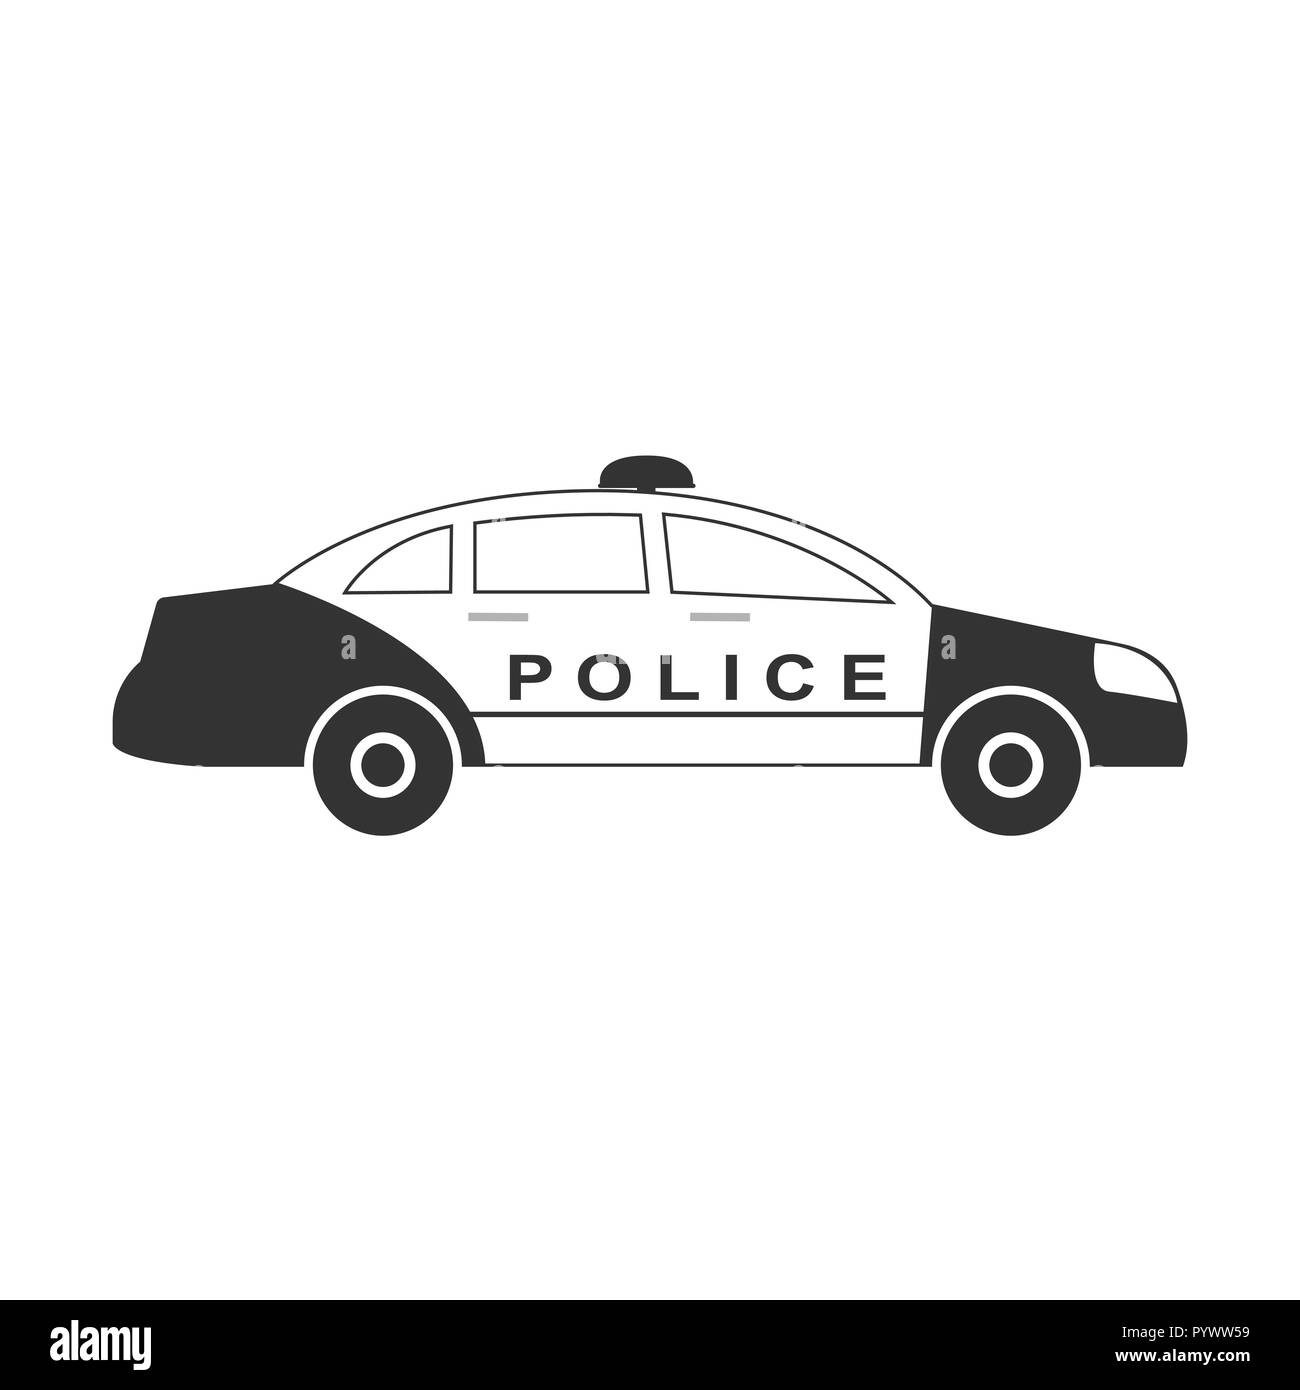 Black And White Police Car Designs